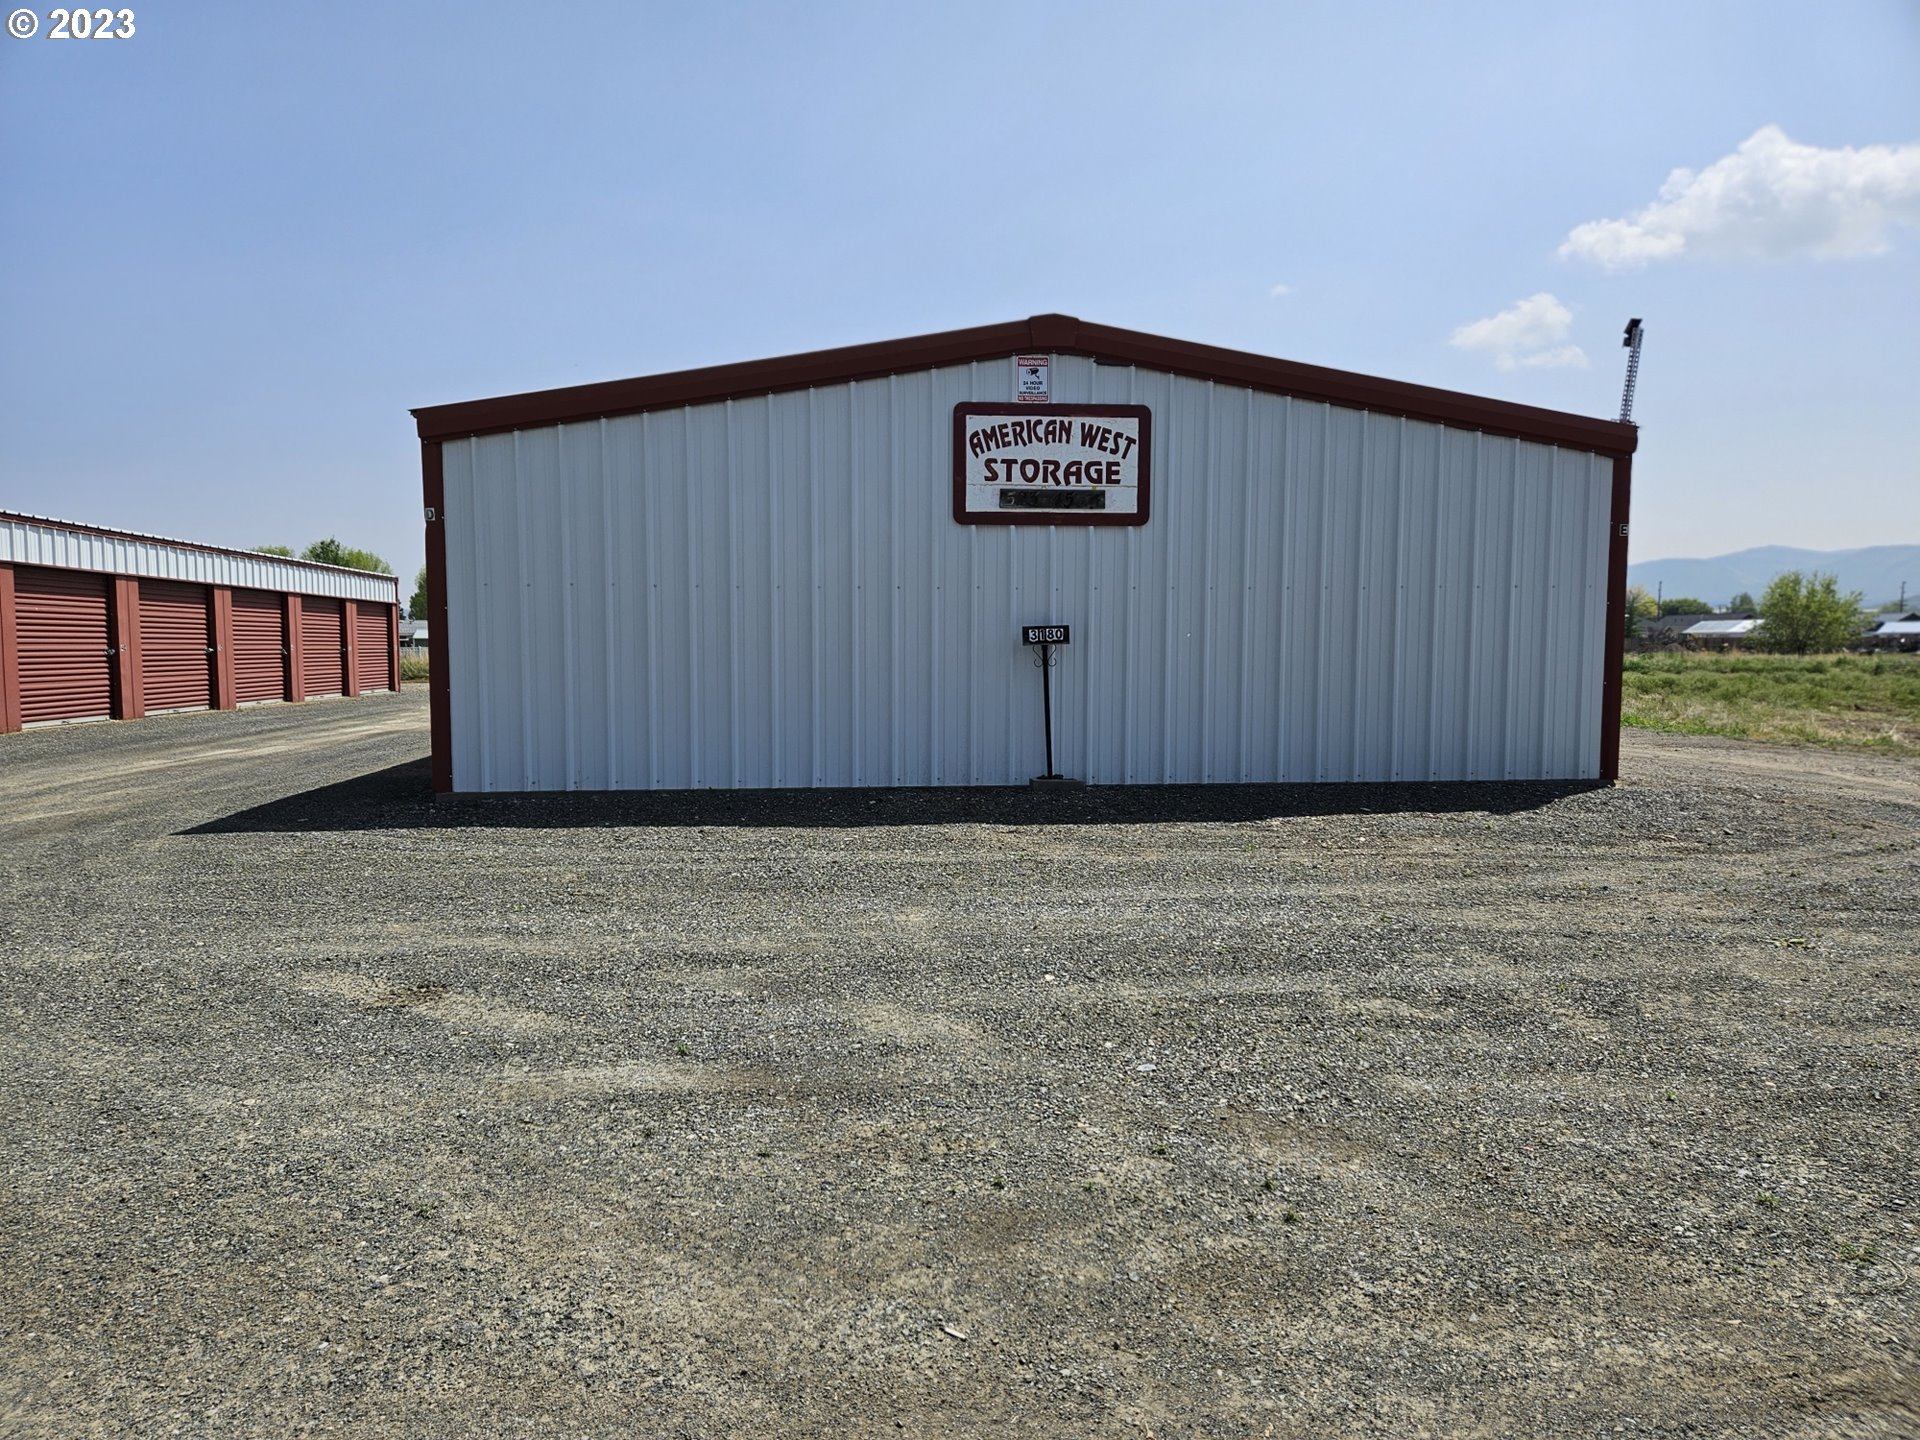 Amazing opportunity to get started in the self storage business. Three buildings, 42 units with 5,250 NRSF Combined. Currently 100% occupied ranging in size from 5x10 t0 10x20. Property sits on approximately .62 acres and provides an undeveloped area to build additional units or use as outside storage. Possible owner financing to qualified buyer with sufficient down payment.